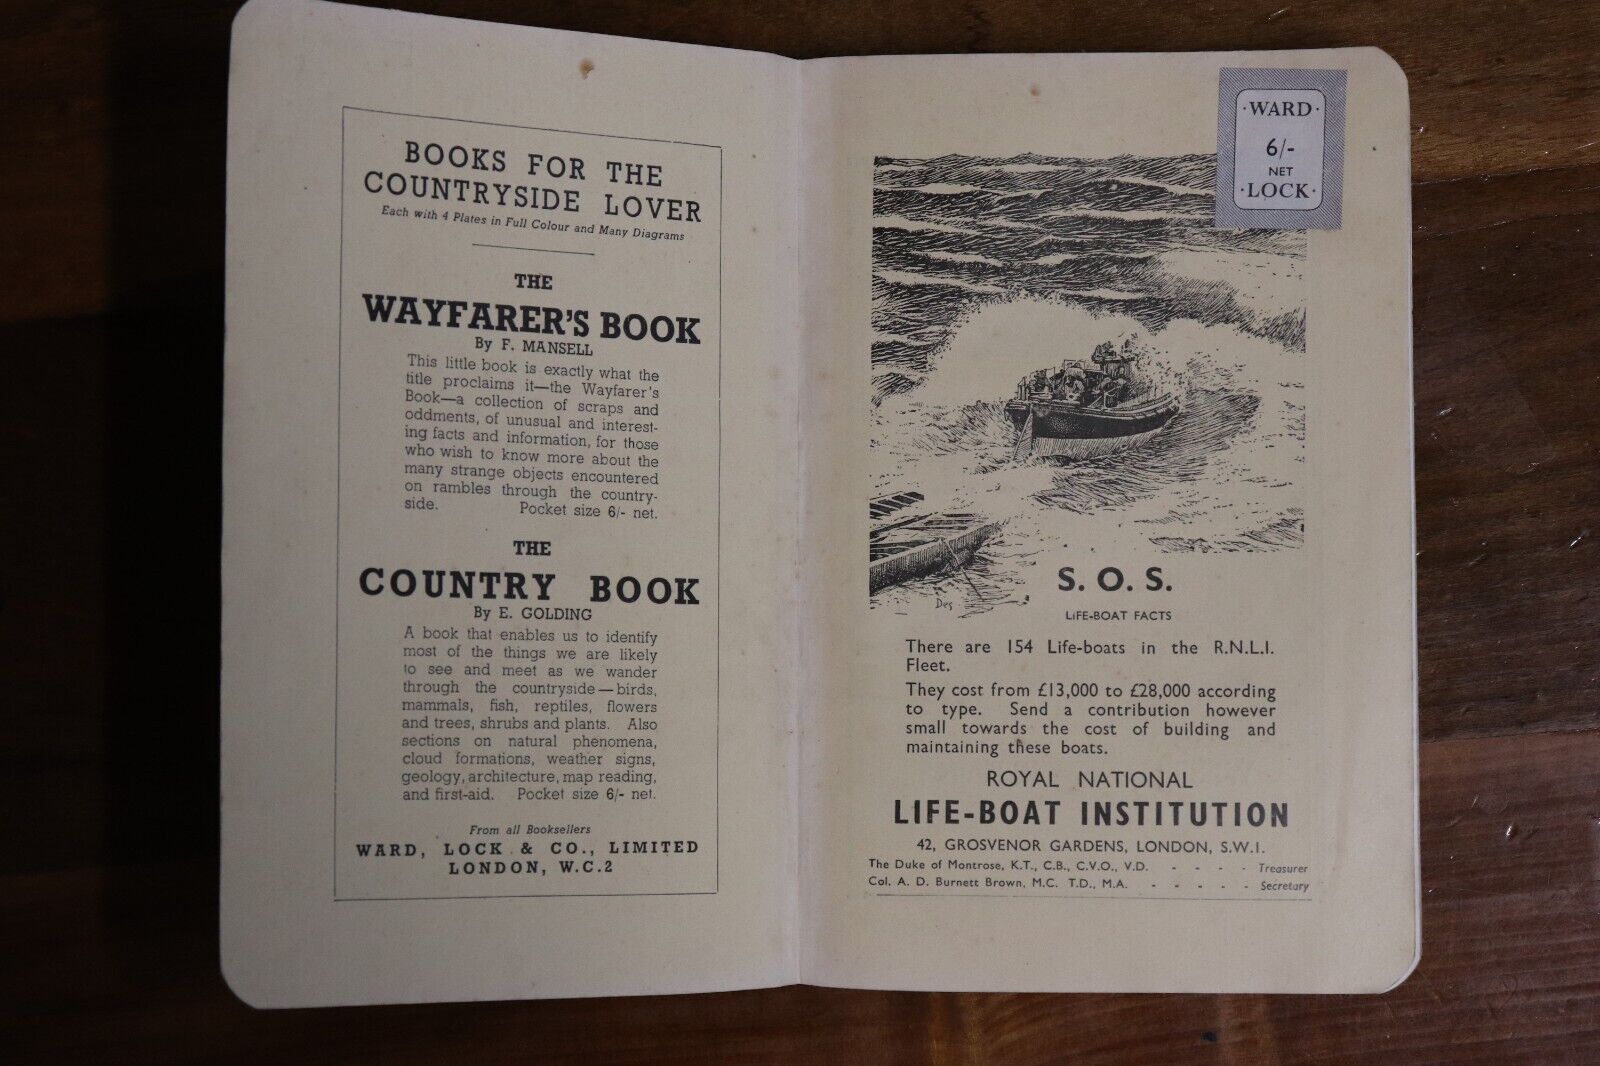 Guide To Ilfracombe: Ward Lock & Co - c1930 - Antique Travel Guide Book w/Maps